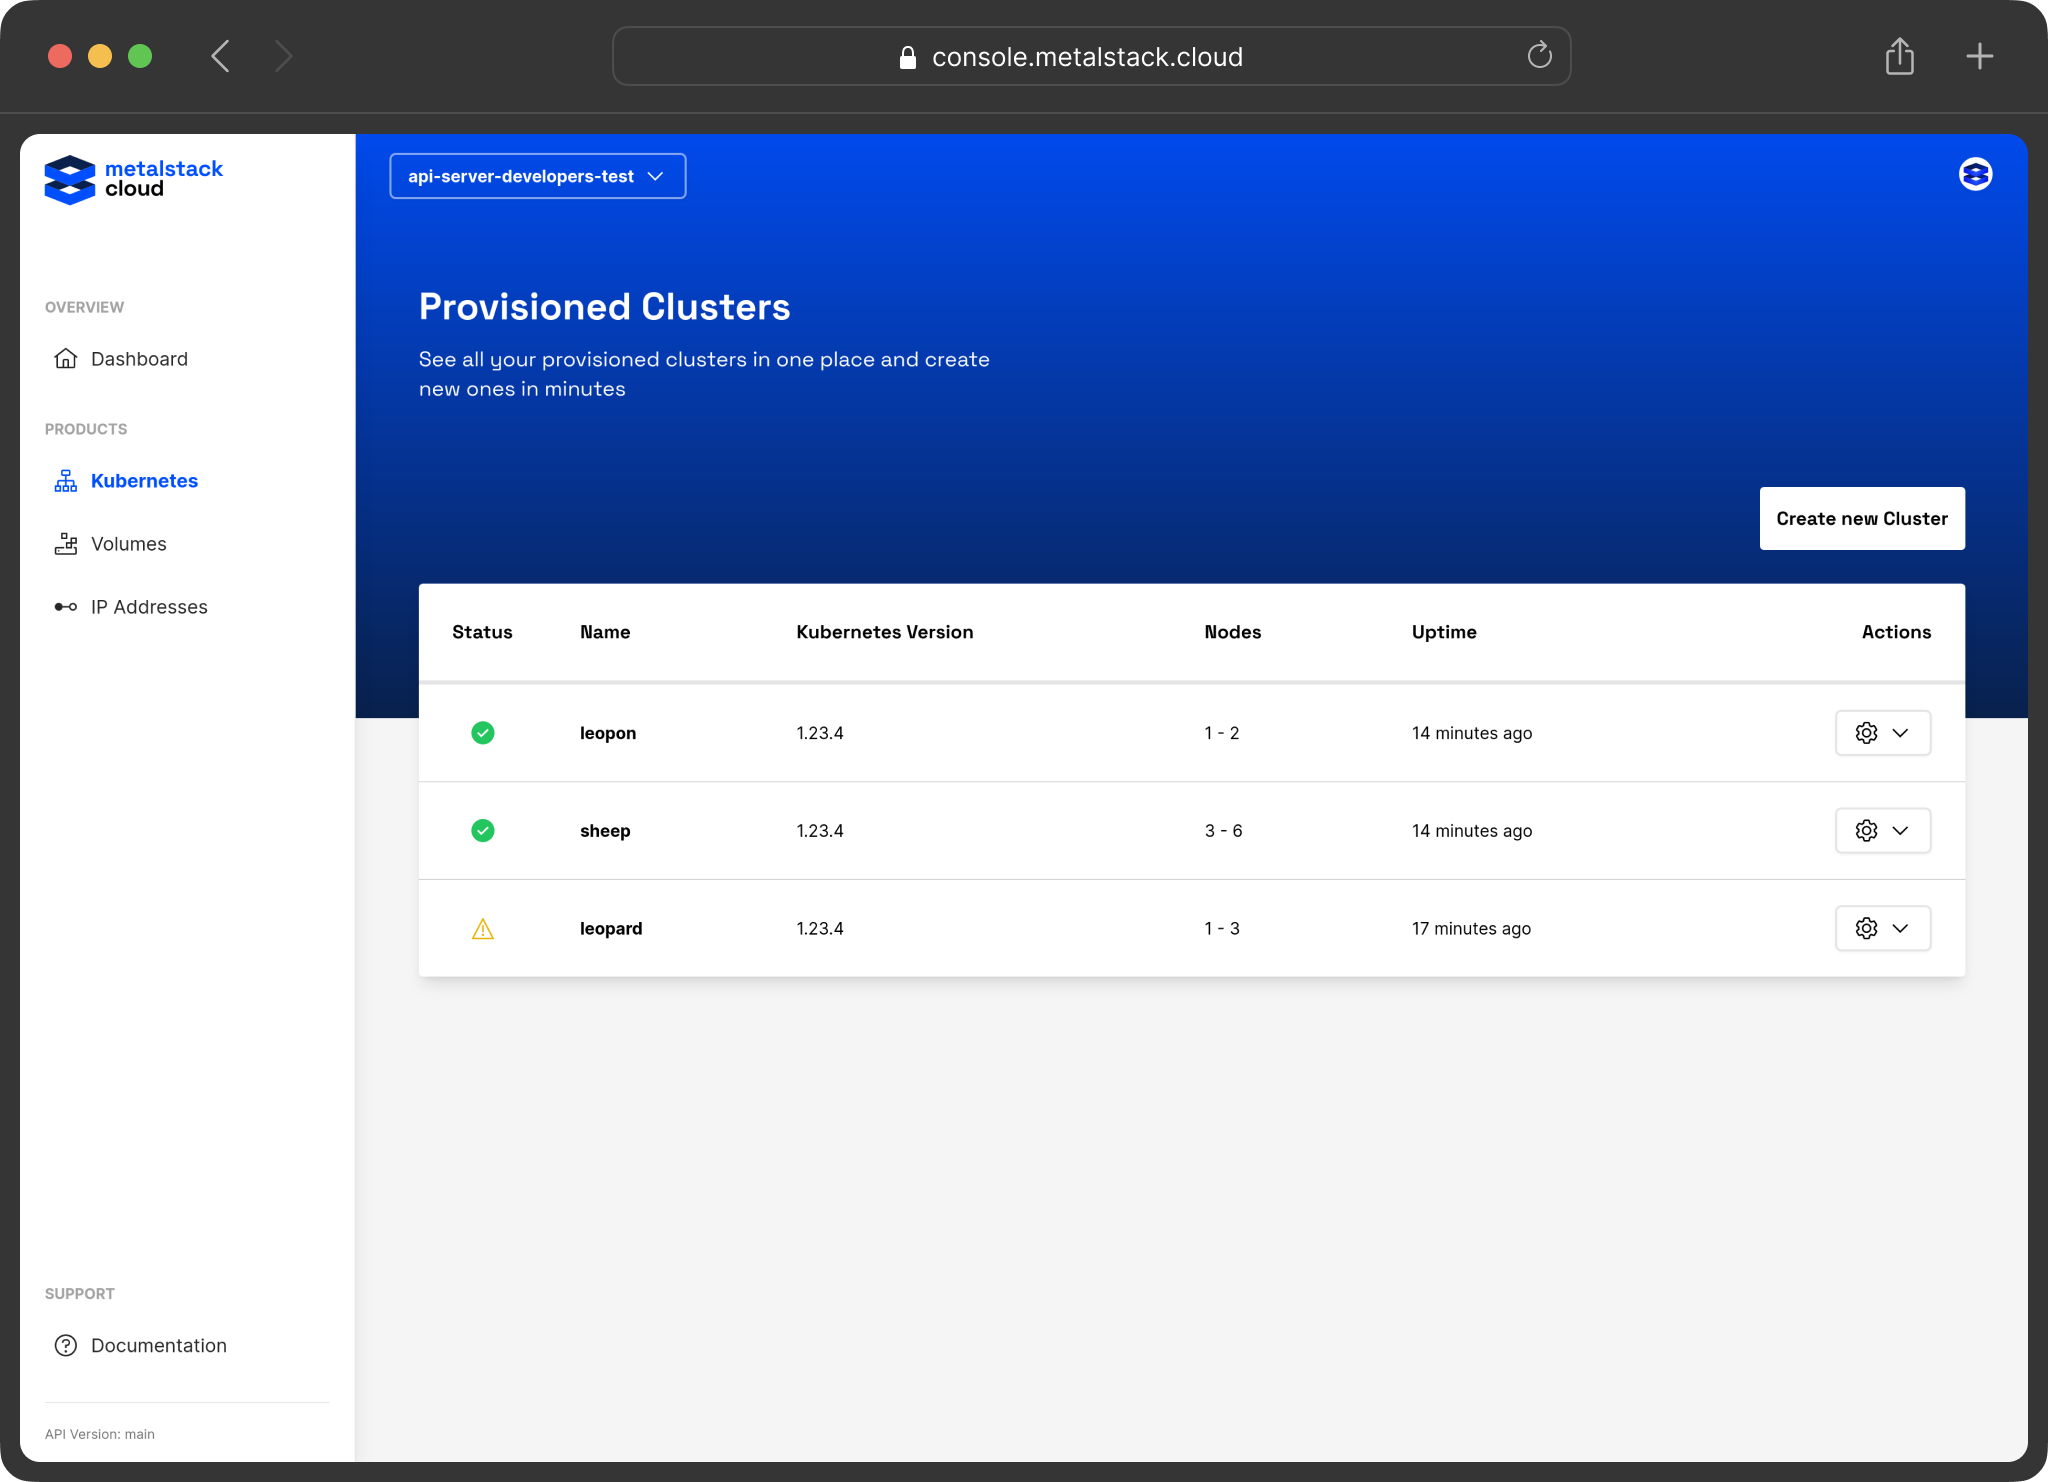 Screenshot of the user interface of the metalstack.cloud management console.